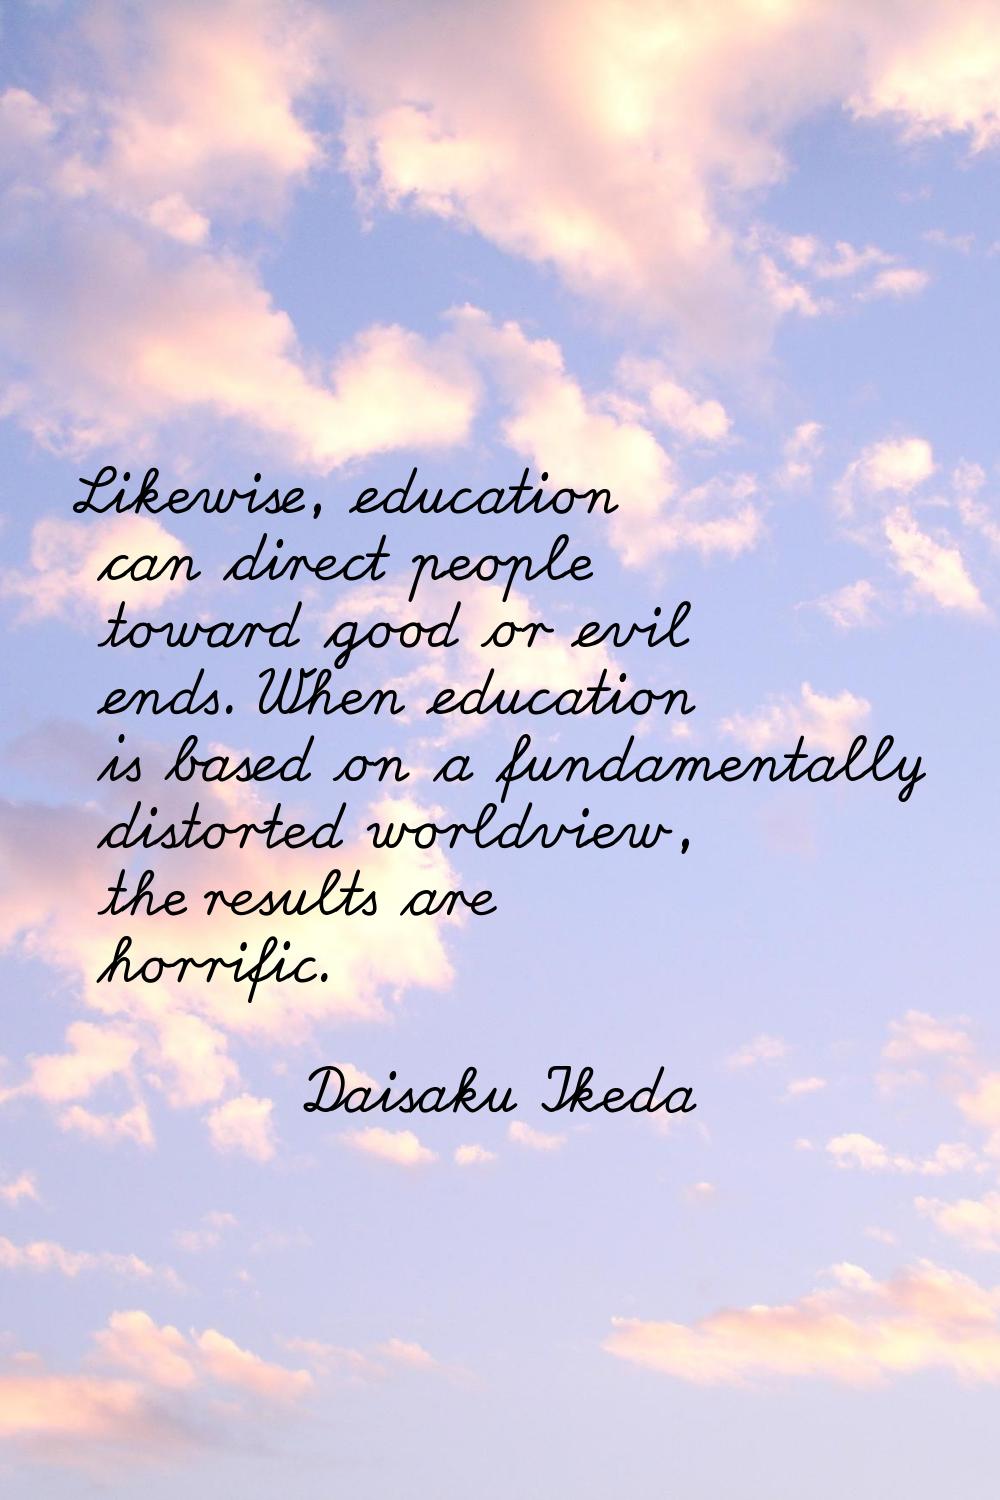 Likewise, education can direct people toward good or evil ends. When education is based on a fundam